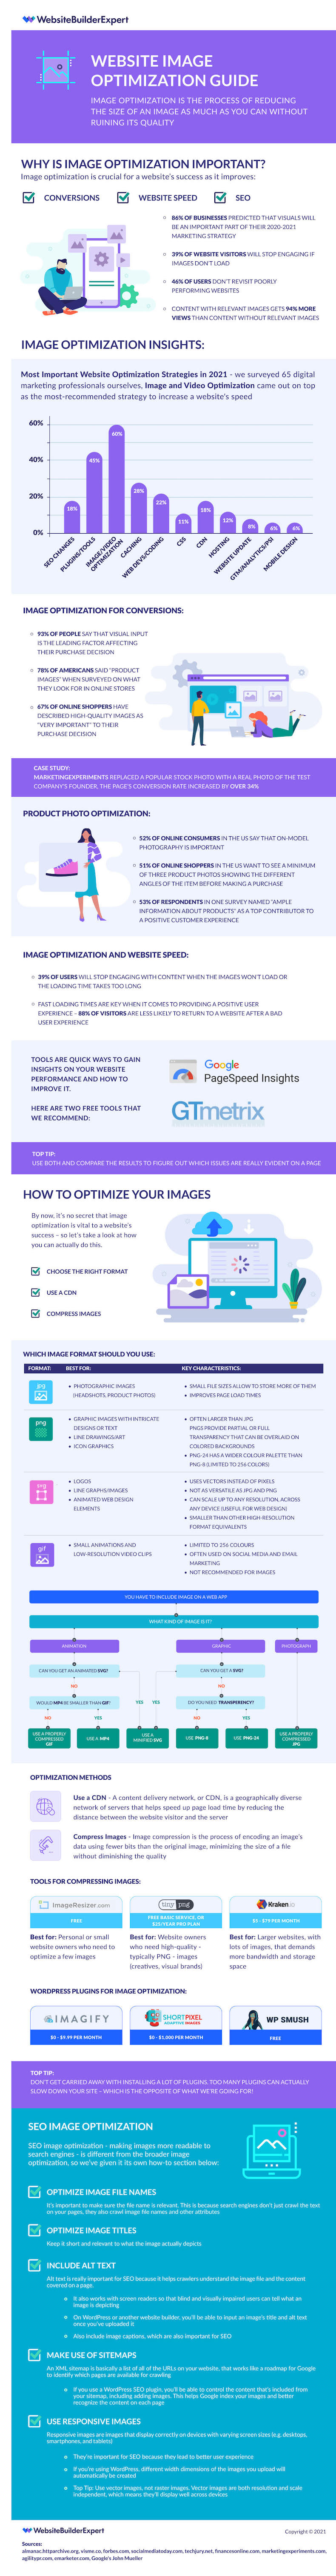 A Quick Guide for Website Image Optimization [Infographic]